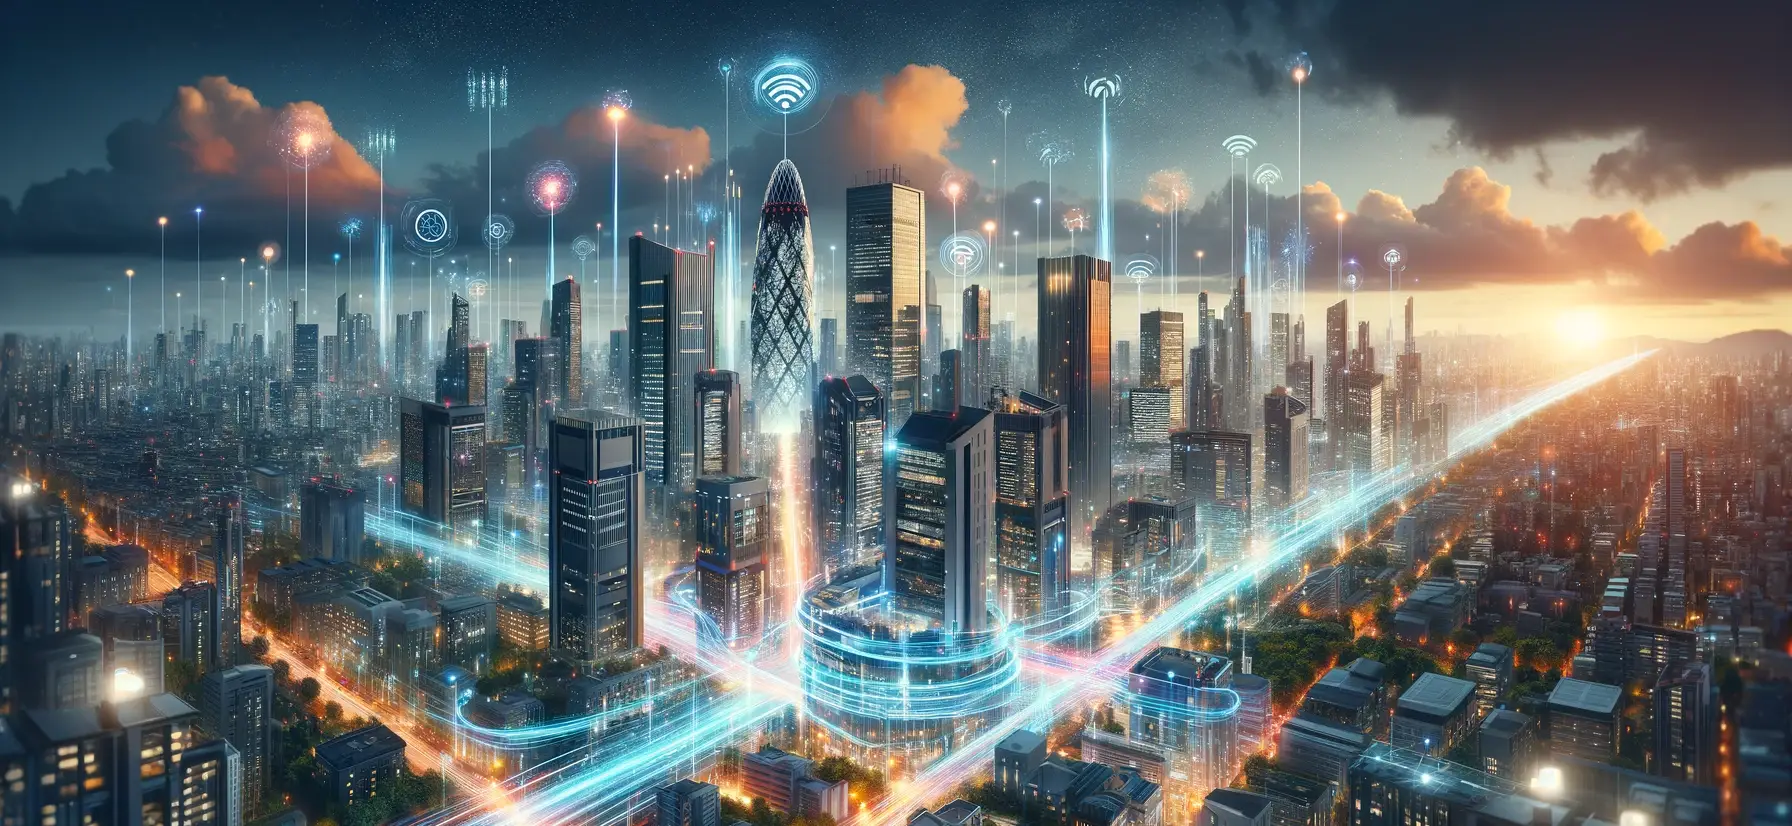 5G technology in smart cities